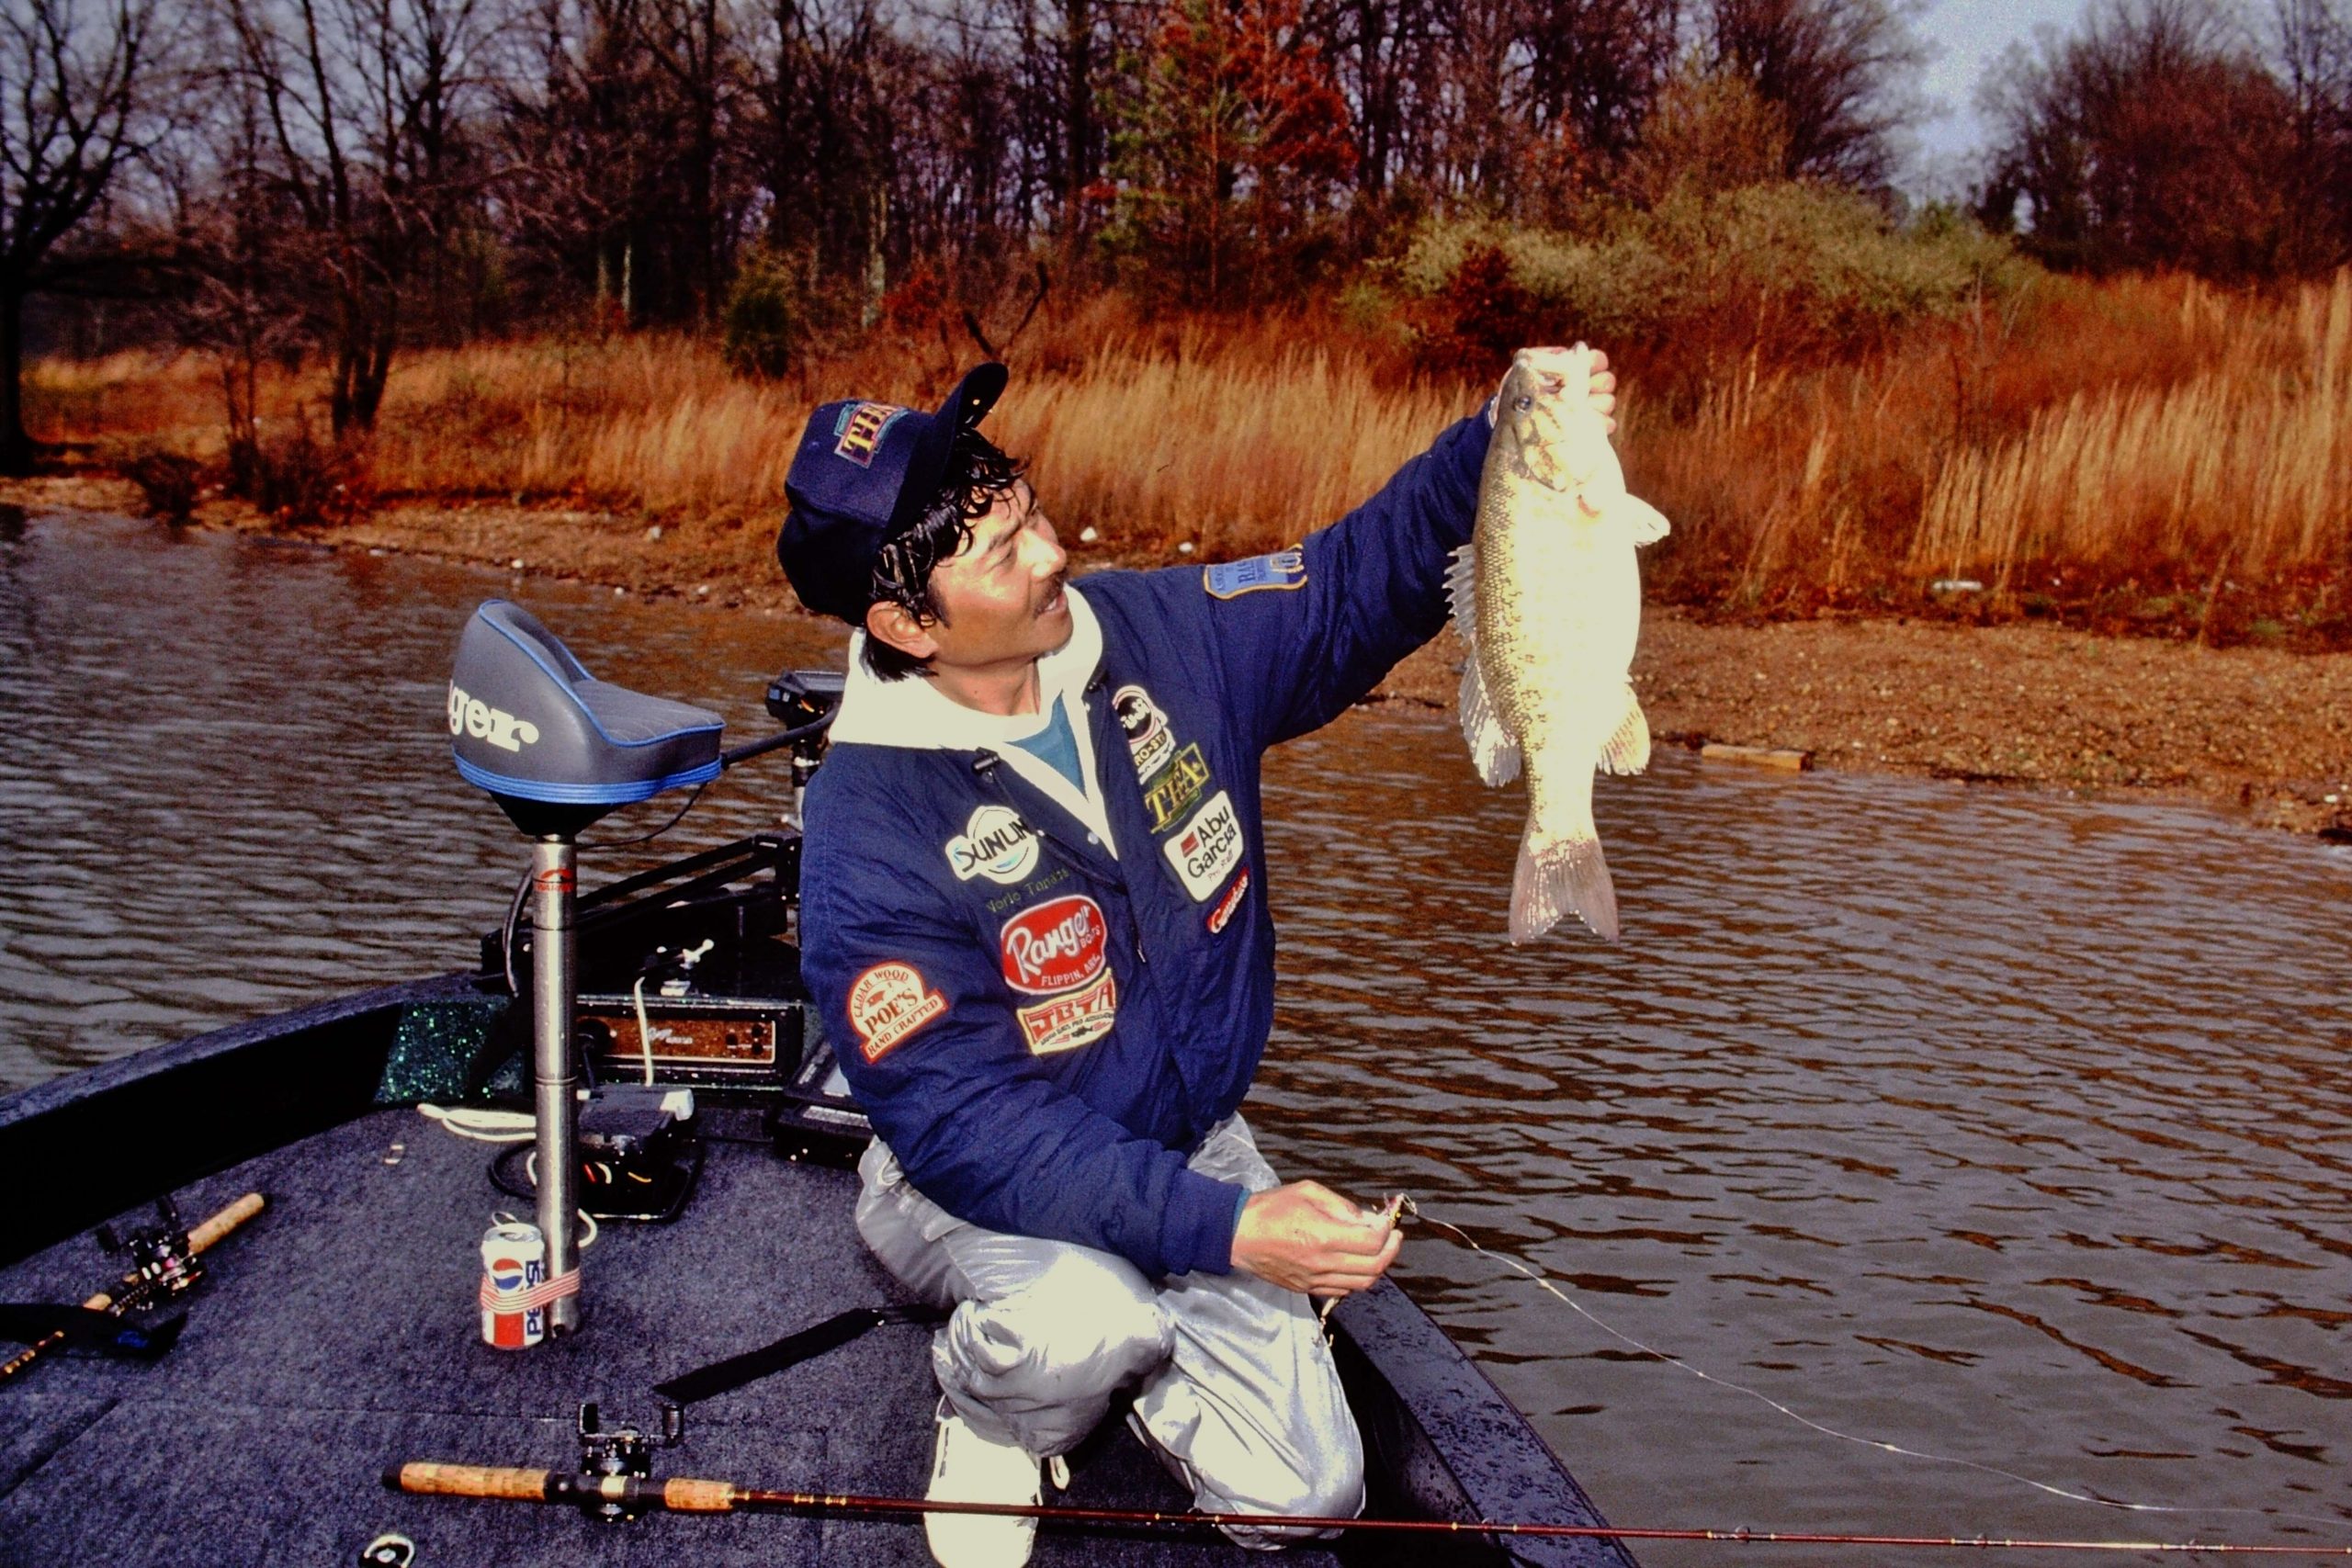 Even in the rough weather, Tanabe showed skill was just as important as luck. Tanabe managed to weigh in three fish at an impressive 14 pounds, 12 ounces. He caught the fish early before the winds began, and he said he broke off another 5-pounder.